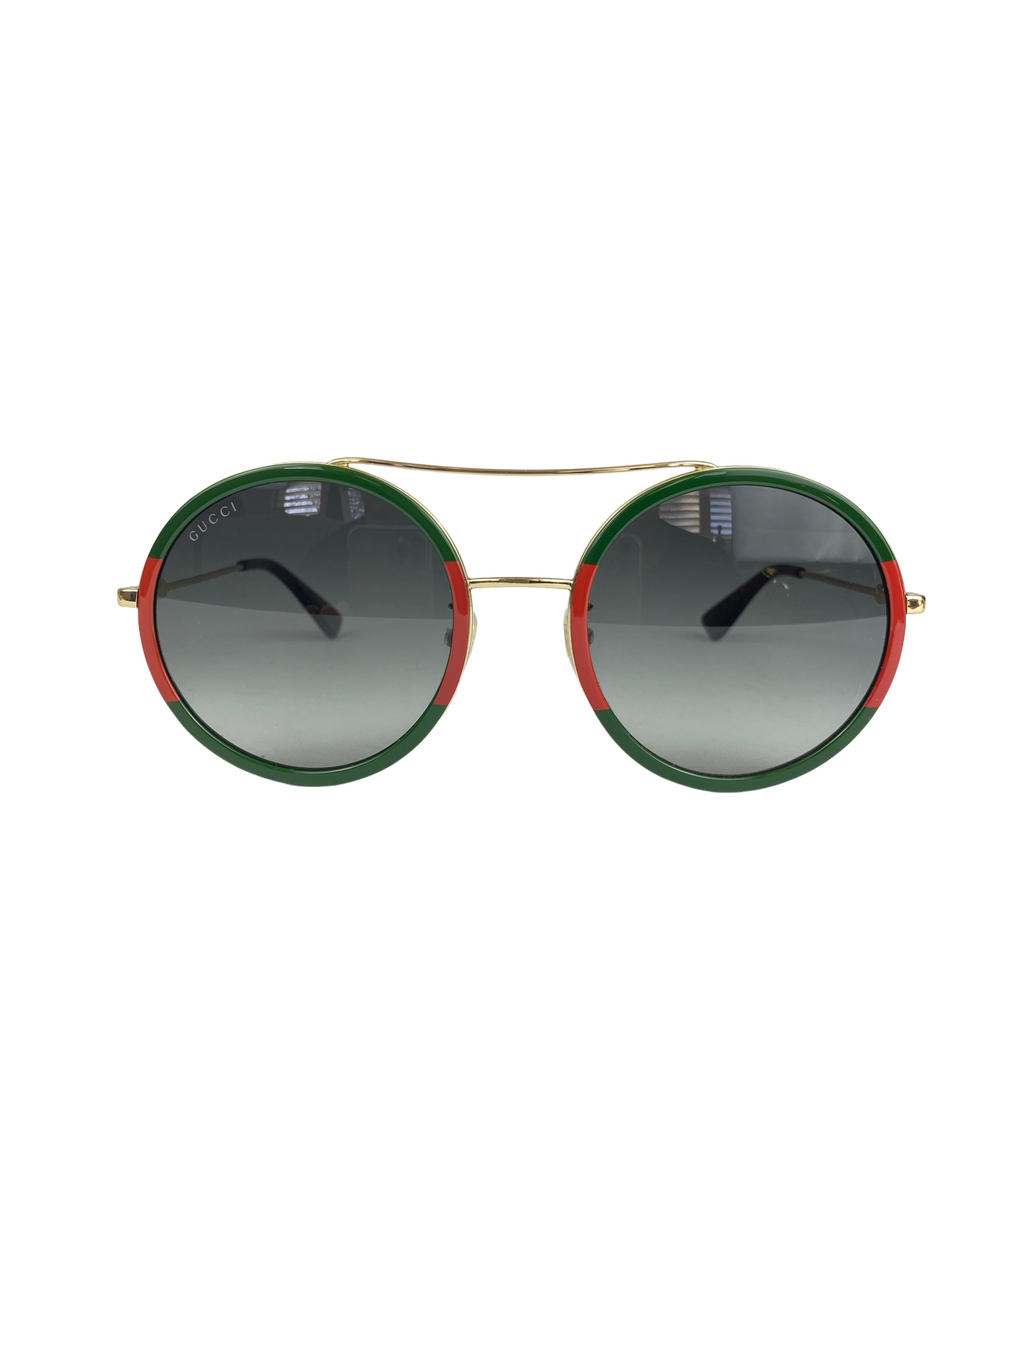 GUCCI - ROUND FRAME METAL SUNGLASSES (GG0061S)